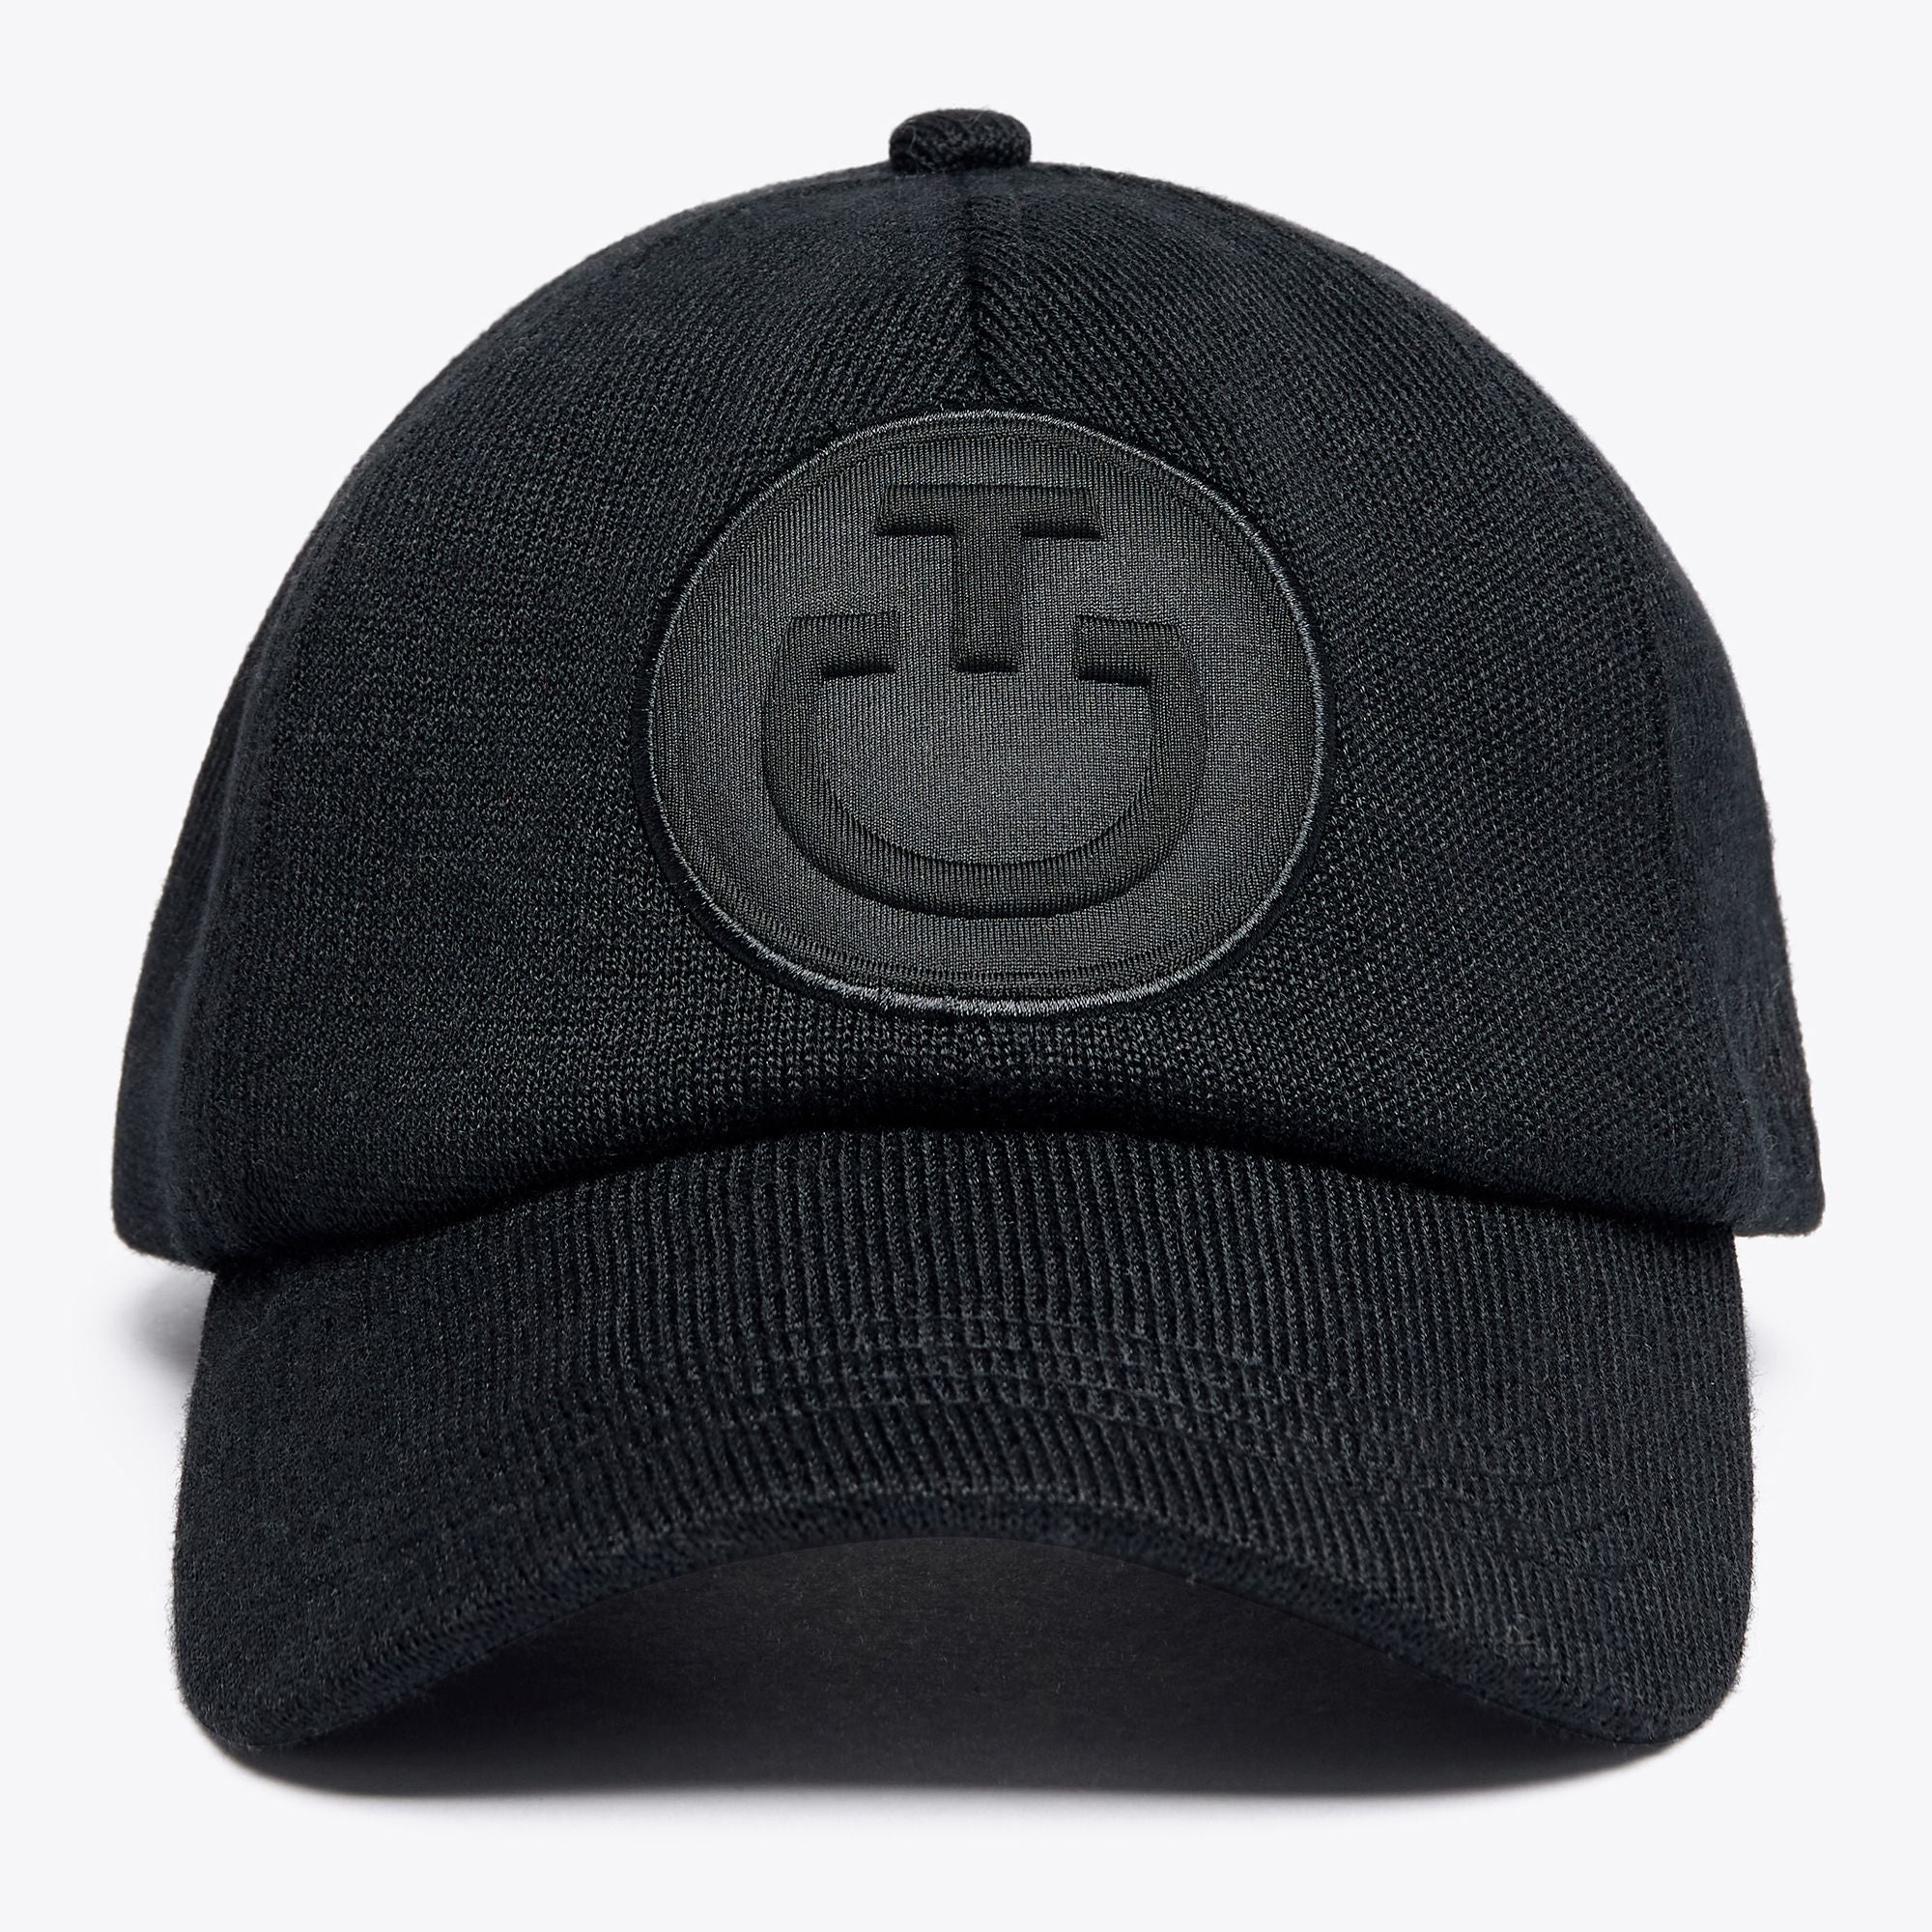 🌟 New - 50% OFF 🌟 CT Embossed Patch Baseball Cap